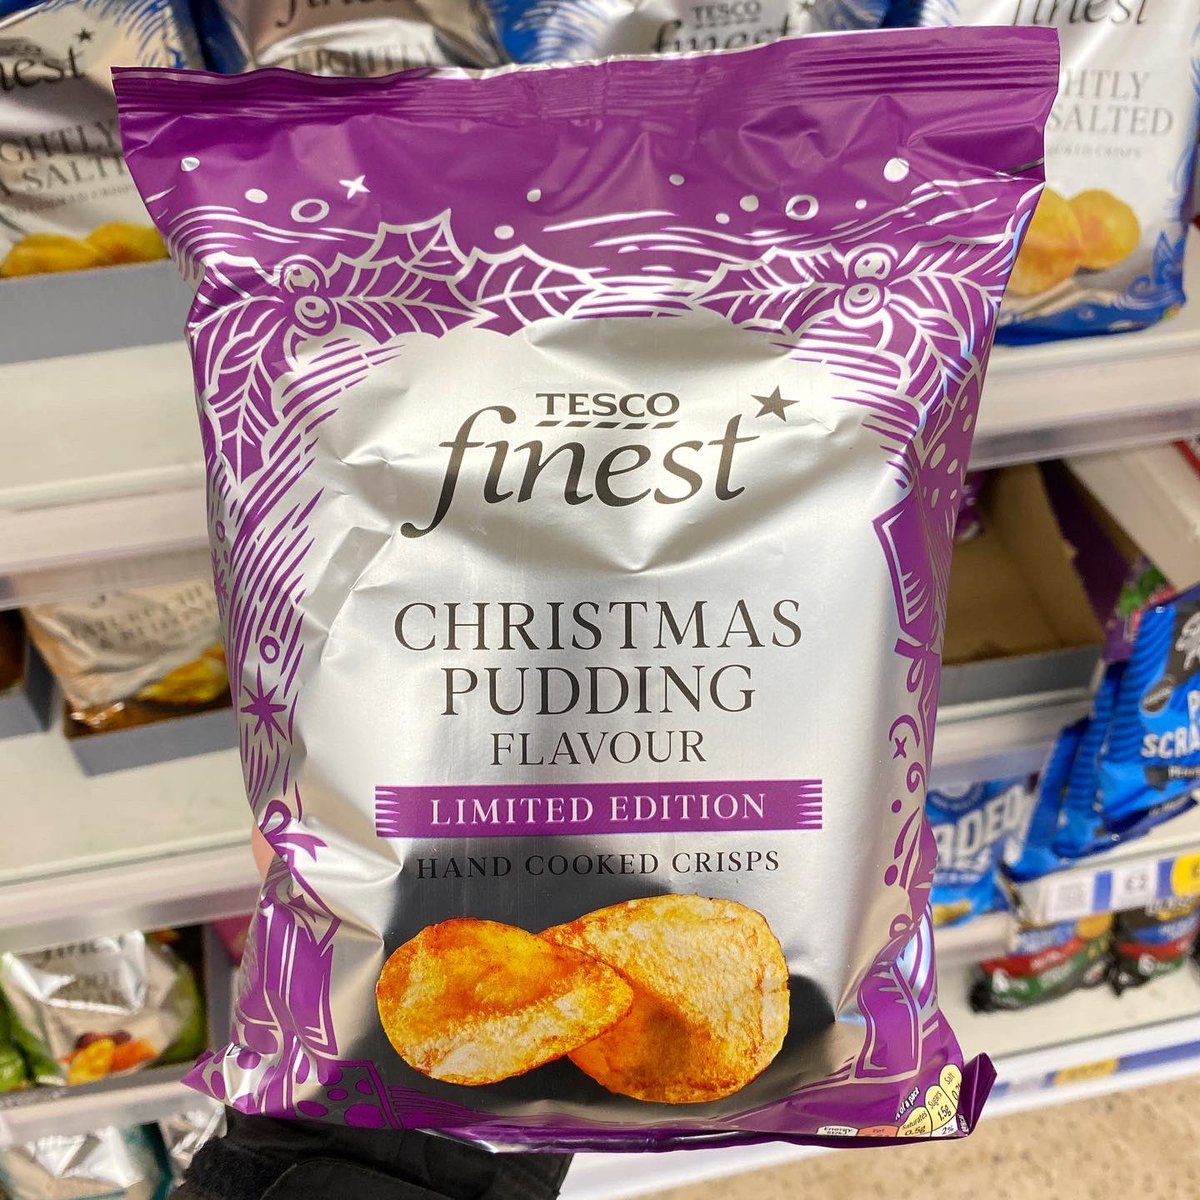 New Christmas Pudding Flavour Crisps at Tesco 🤔 #tesco #crisps #christmaspudding #christmas #chips #snacks